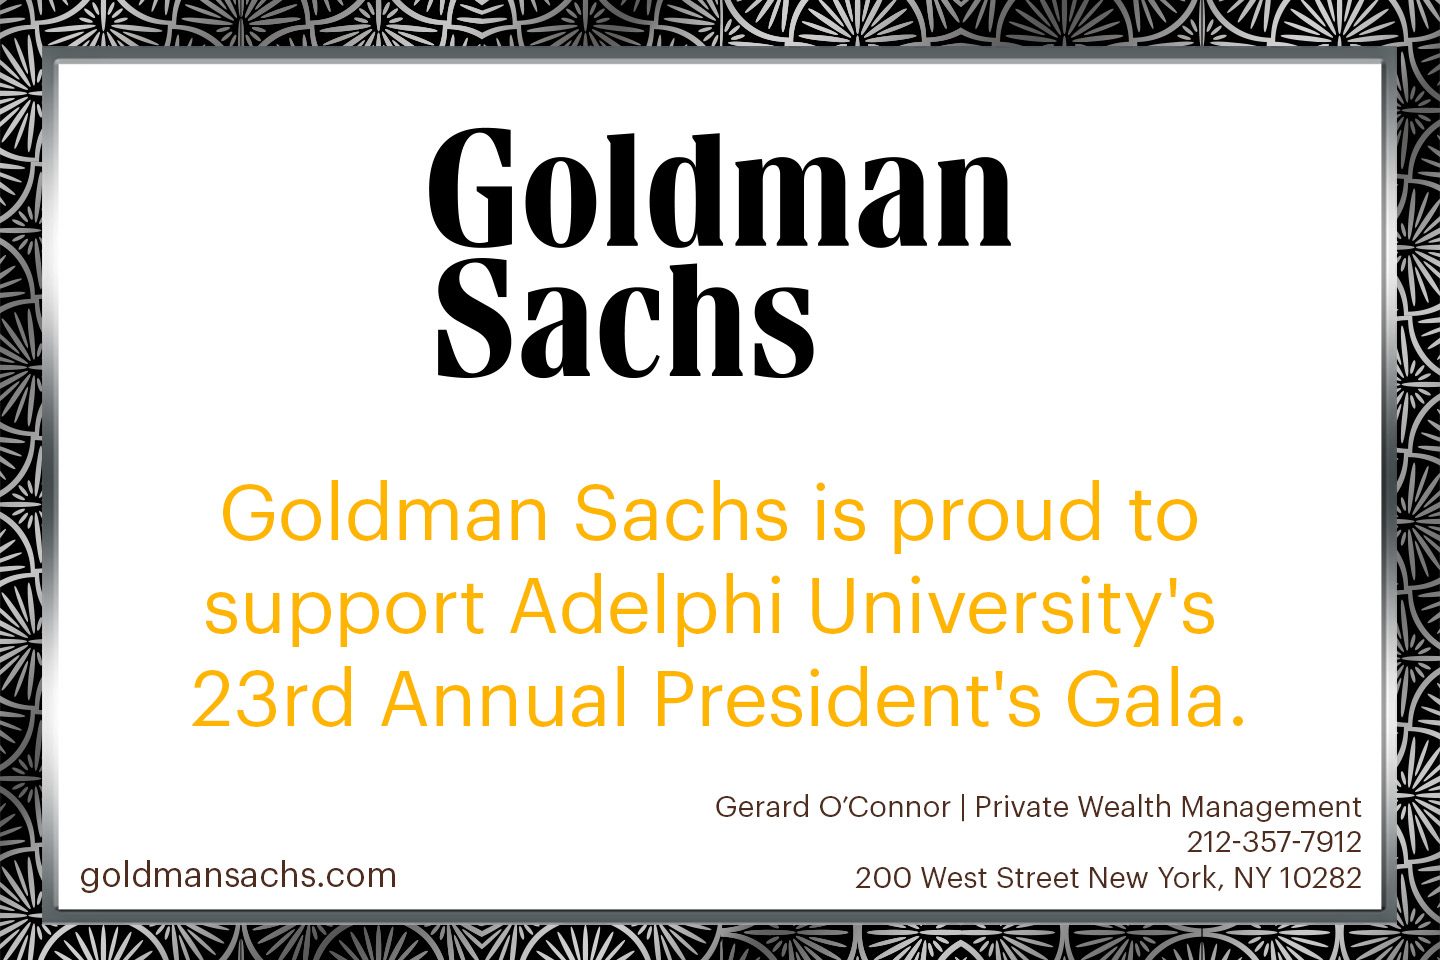 Goldman Sachs is proud to support Adelphi University's 23rd Annual President's Gala.